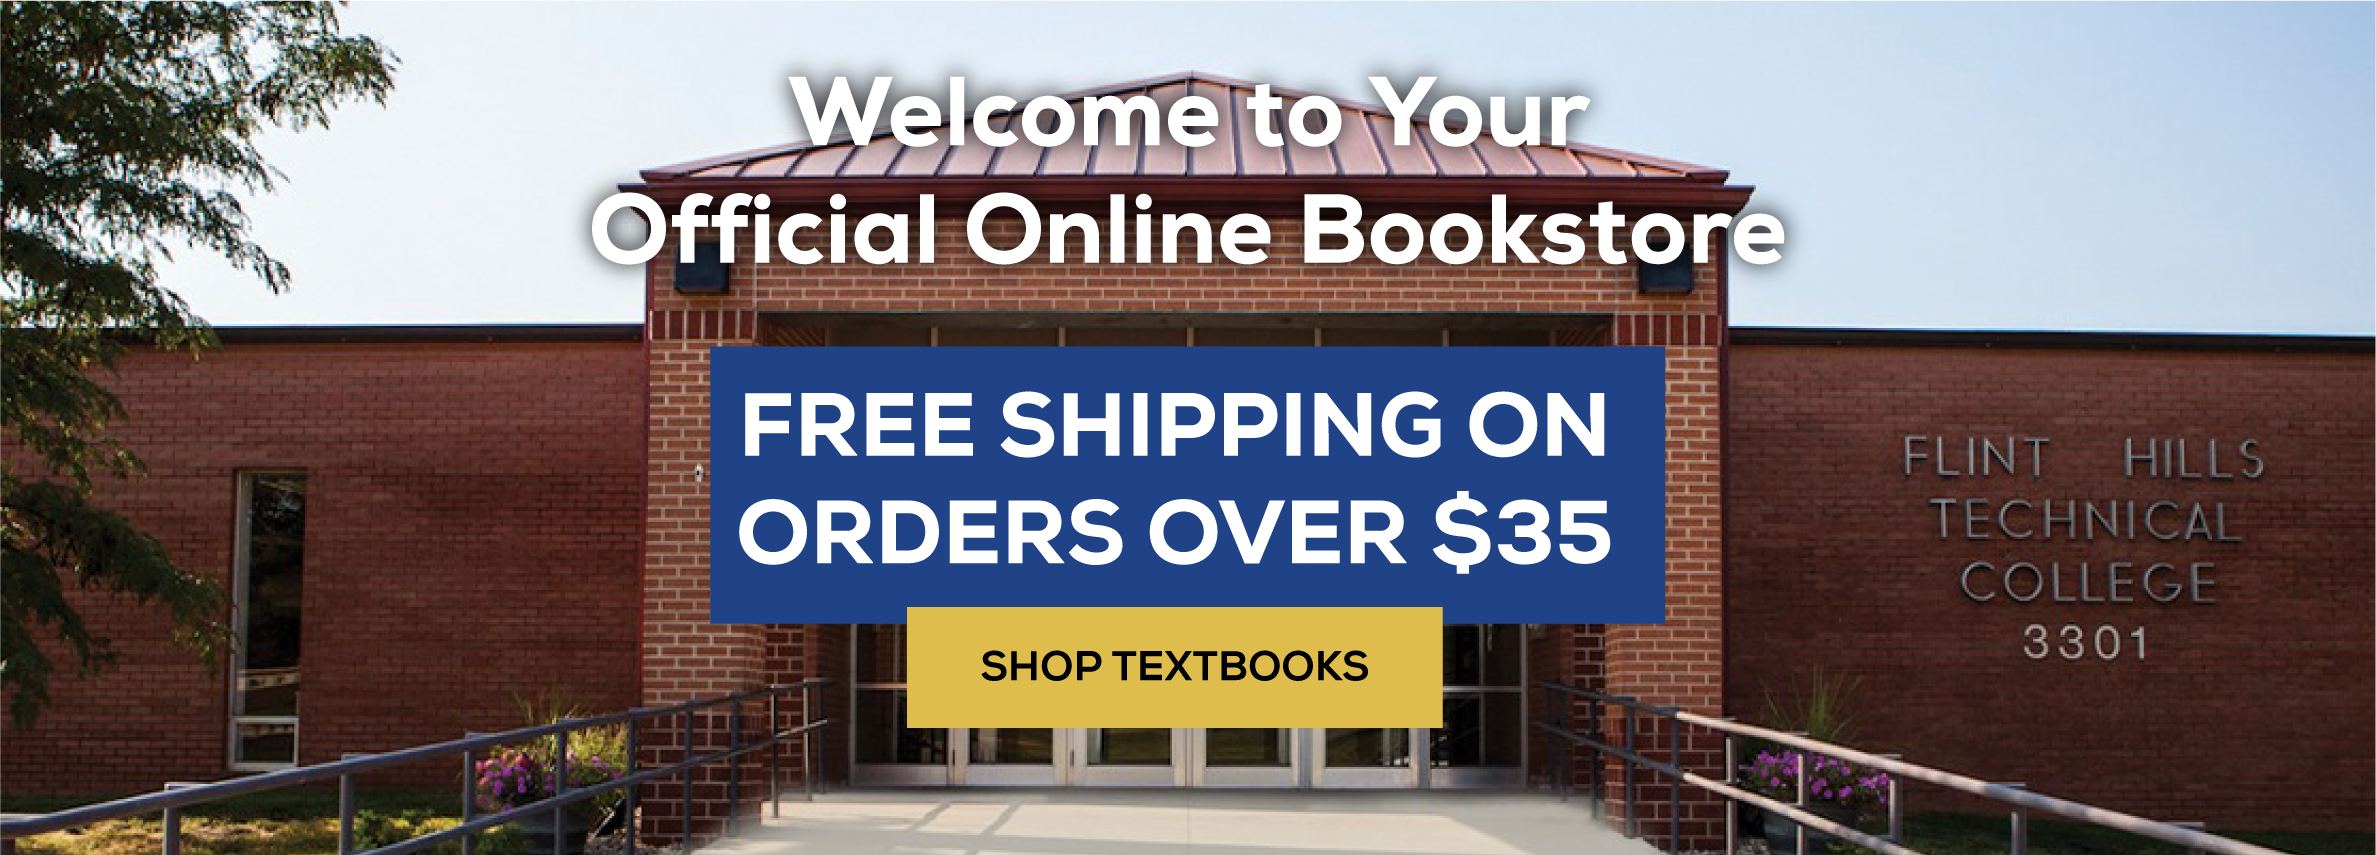 Welcome to your official online bookstore! Free shipping on order over $35. Excludes marketplace purchases. Shop Textbooks